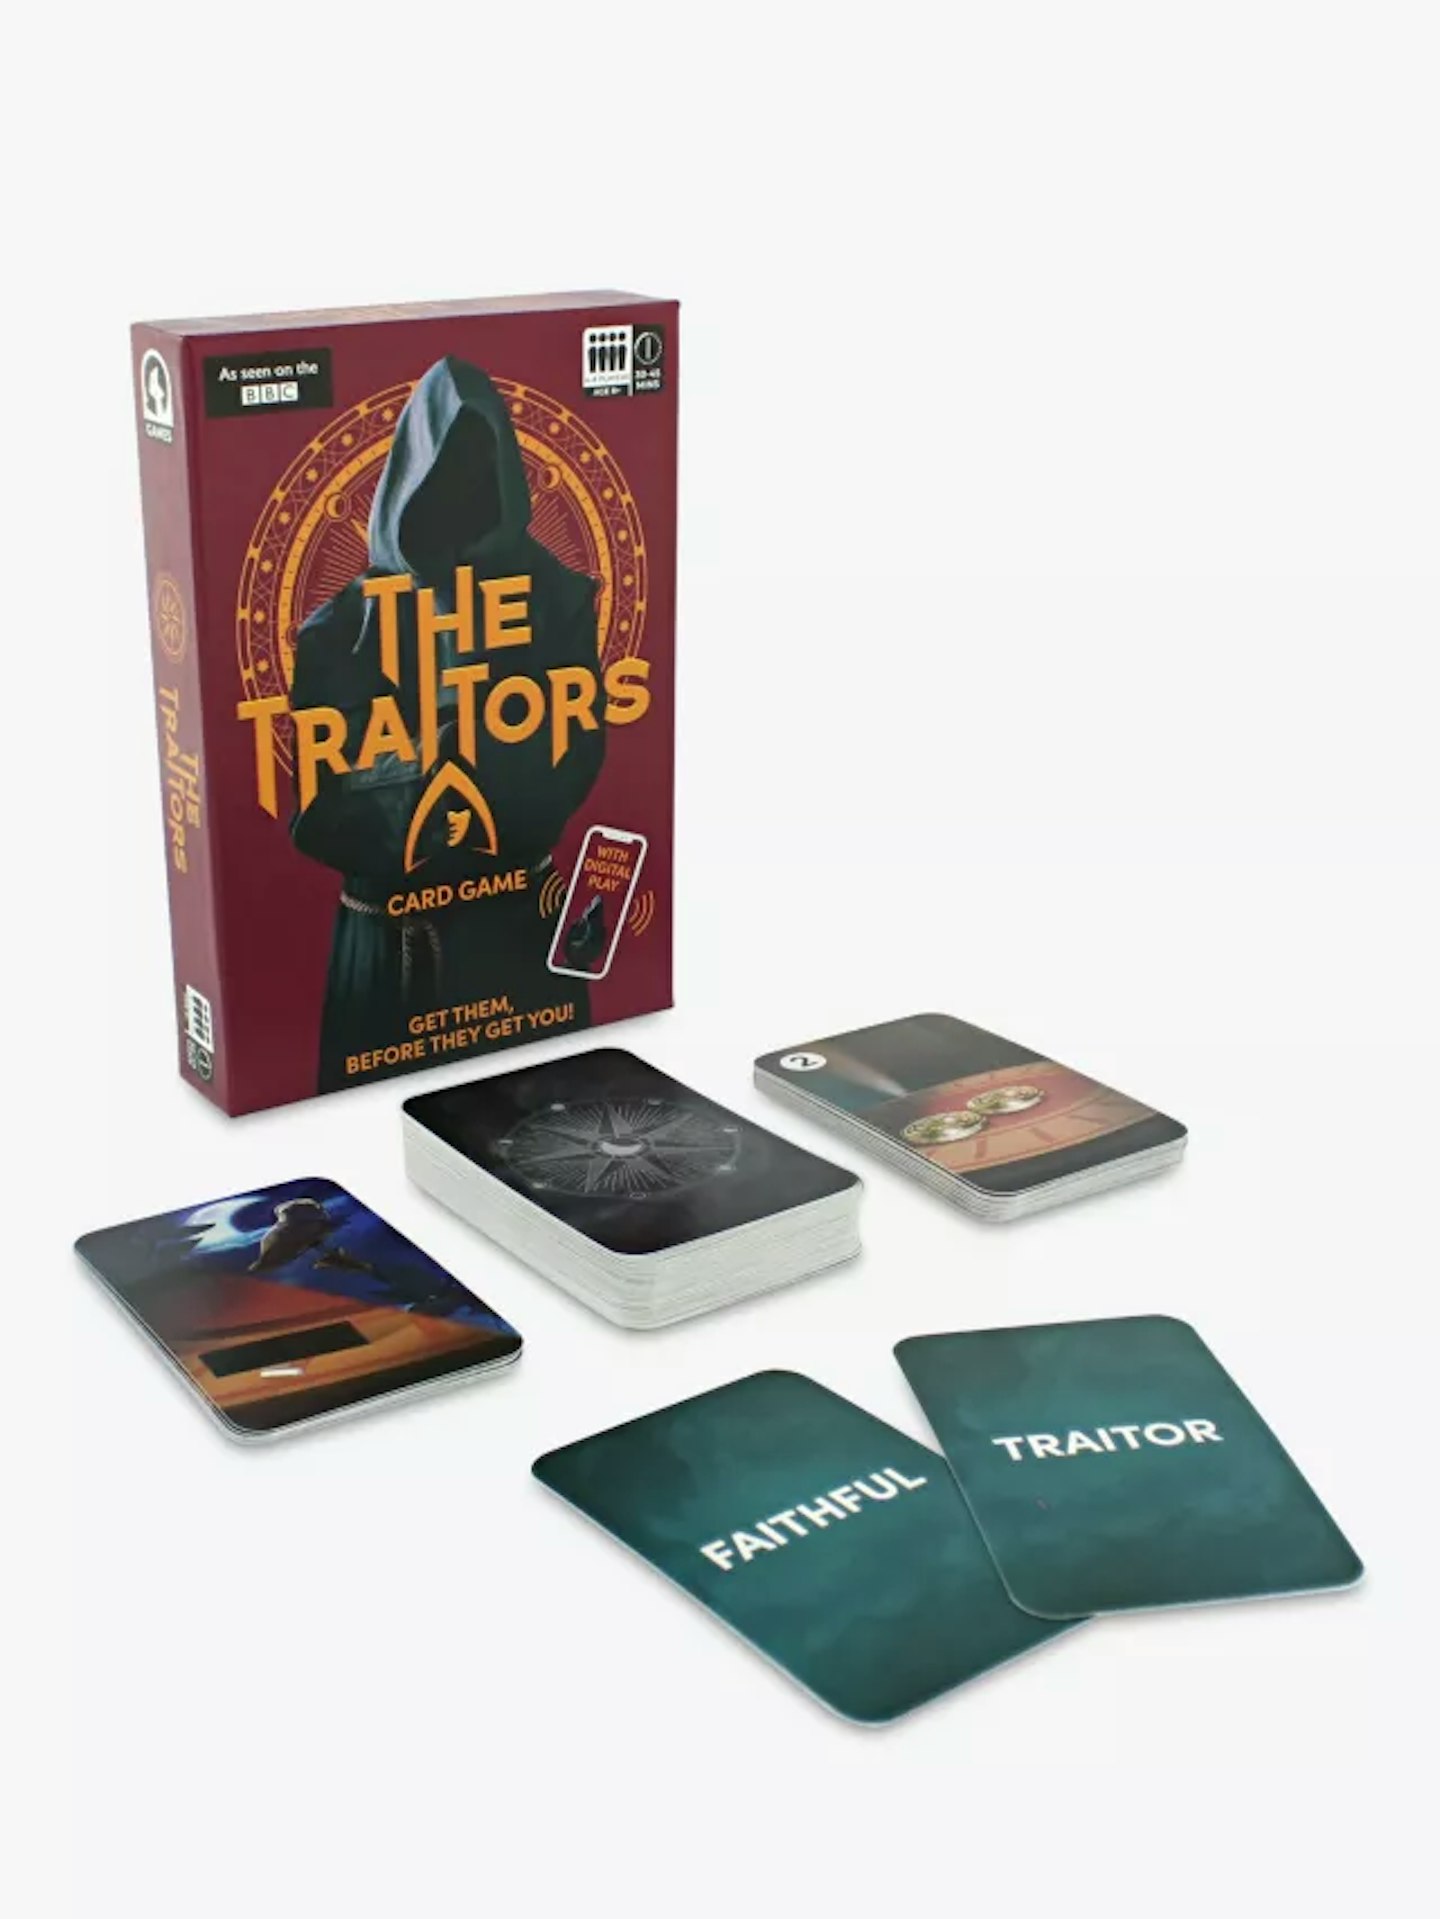 The Traitors card game